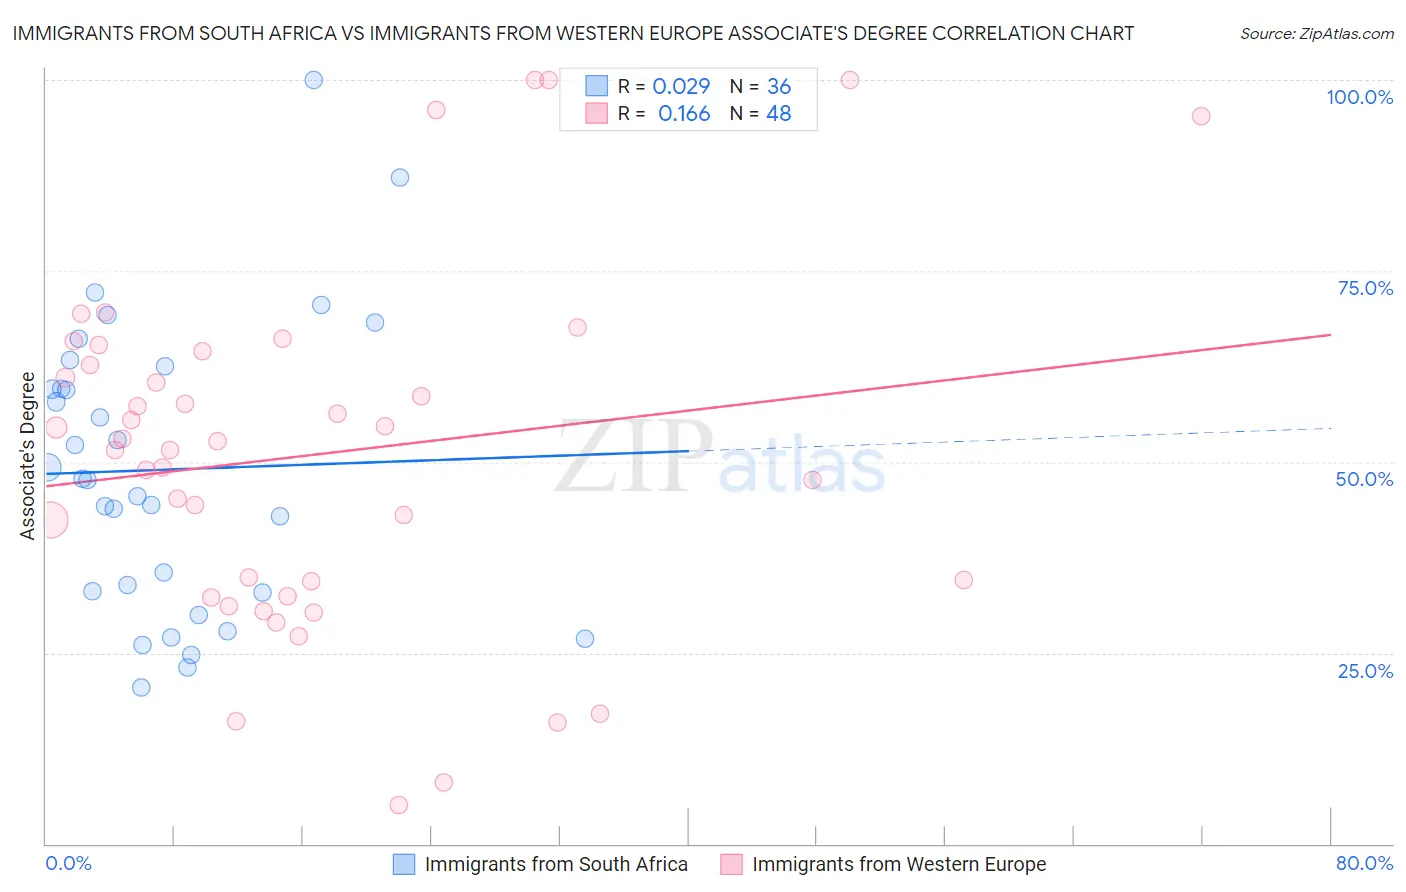 Immigrants from South Africa vs Immigrants from Western Europe Associate's Degree